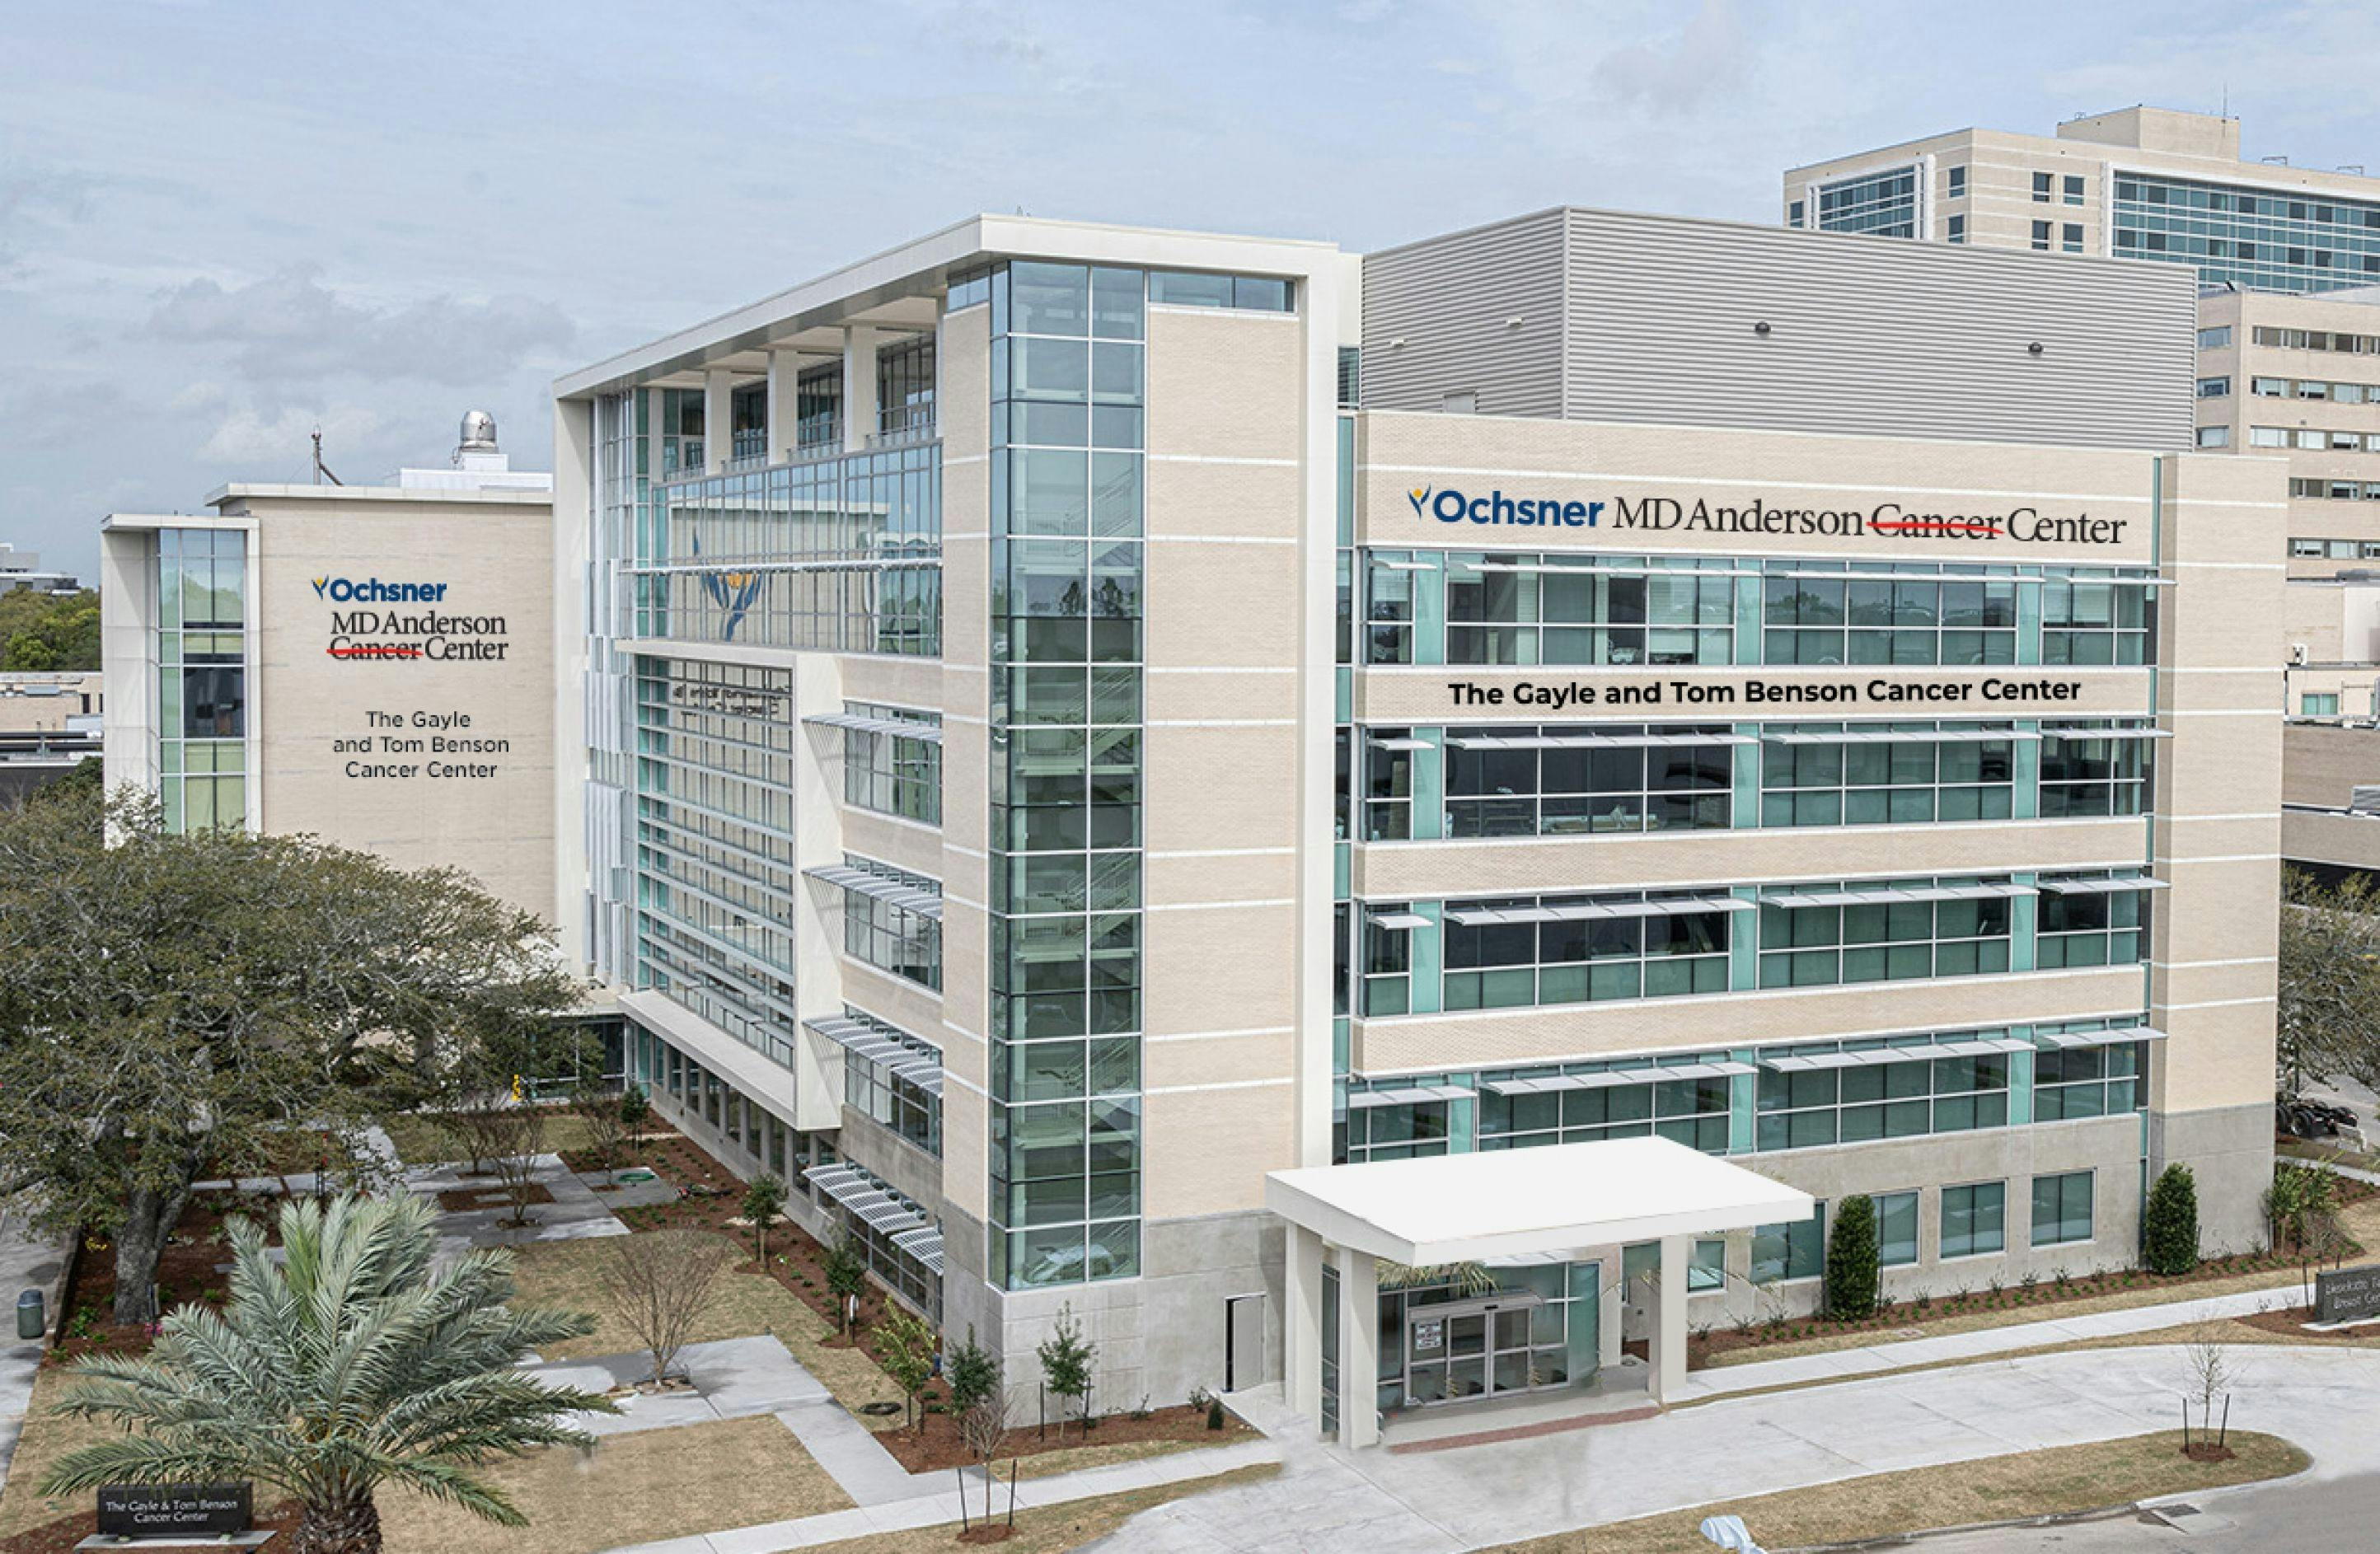 MD Anderson Cancer Center, Ochsner Health collaborate on cancer care